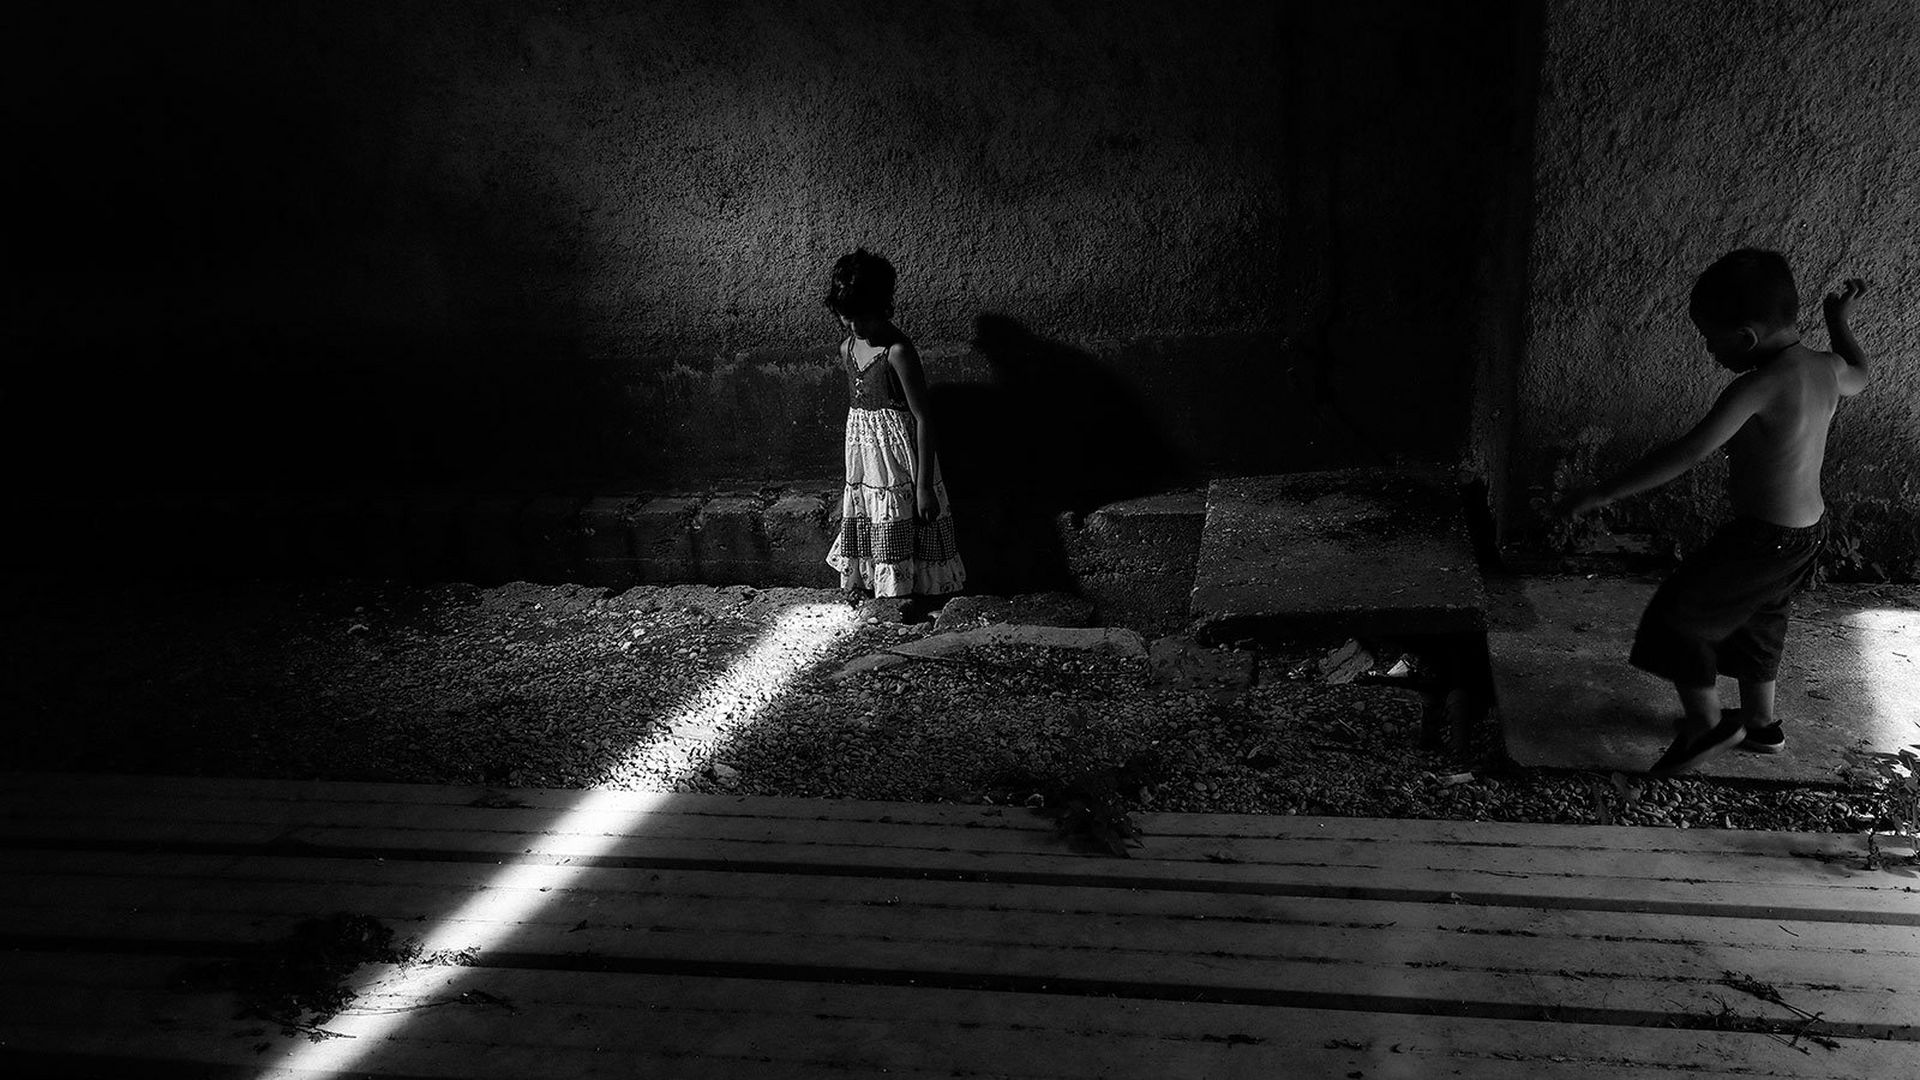 Young gypsy child stands in a shaft of light